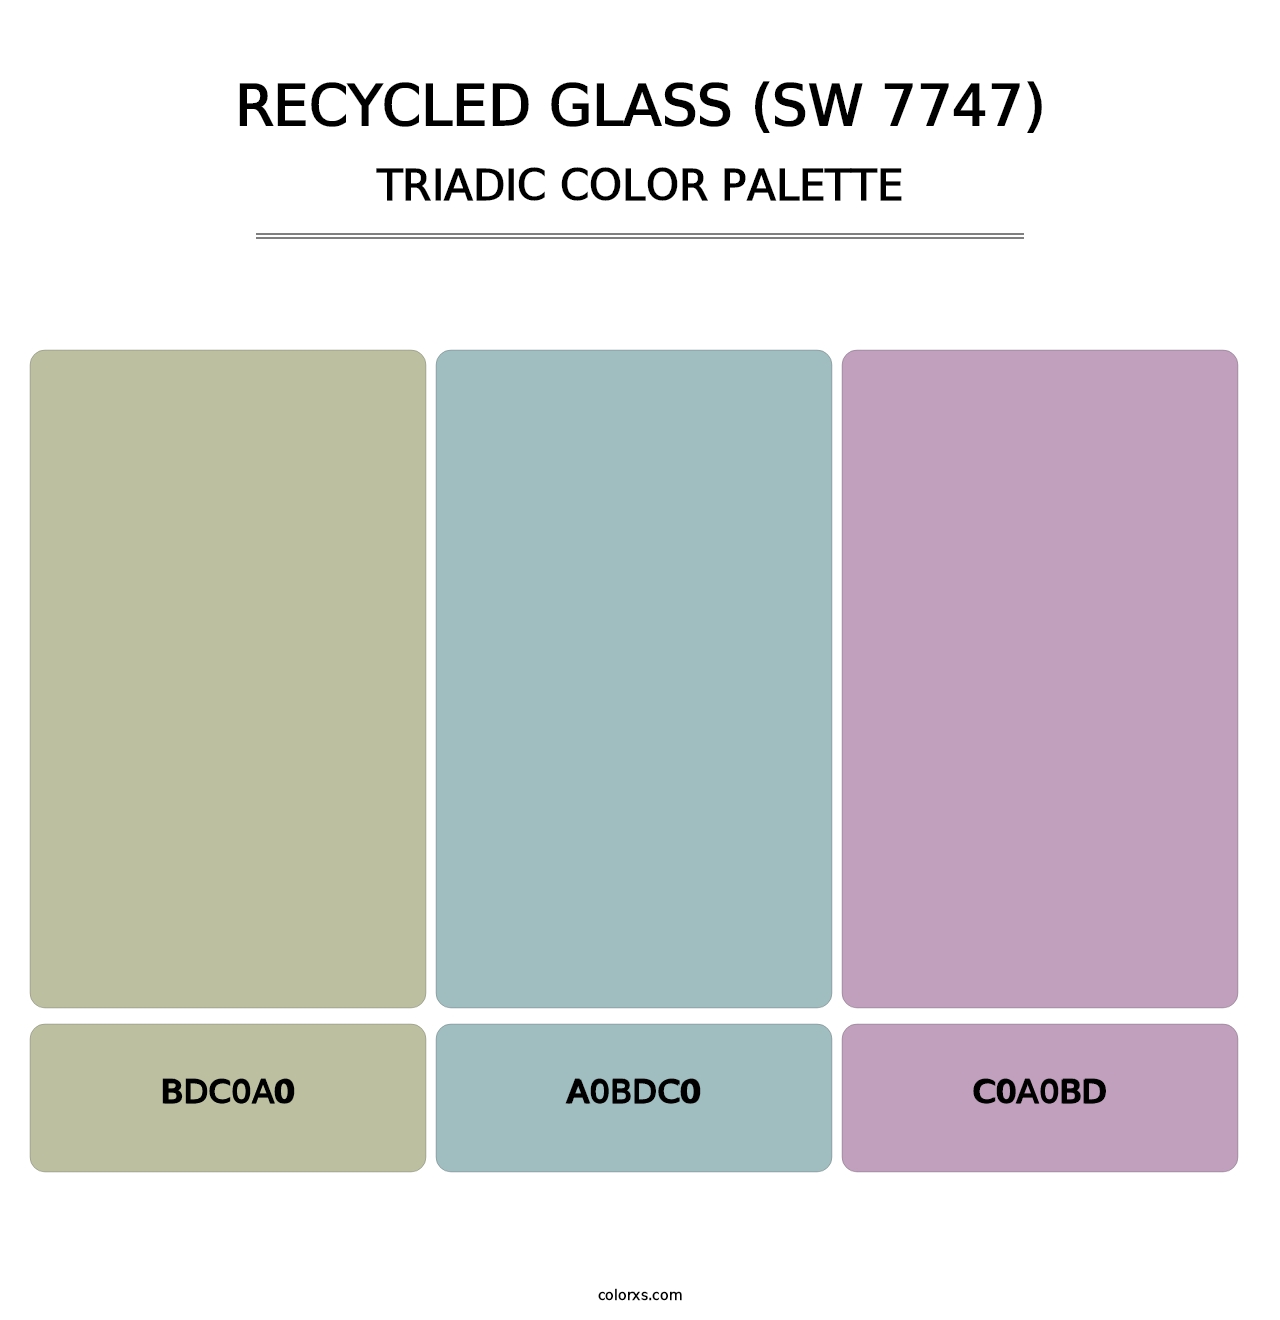 Recycled Glass (SW 7747) - Triadic Color Palette